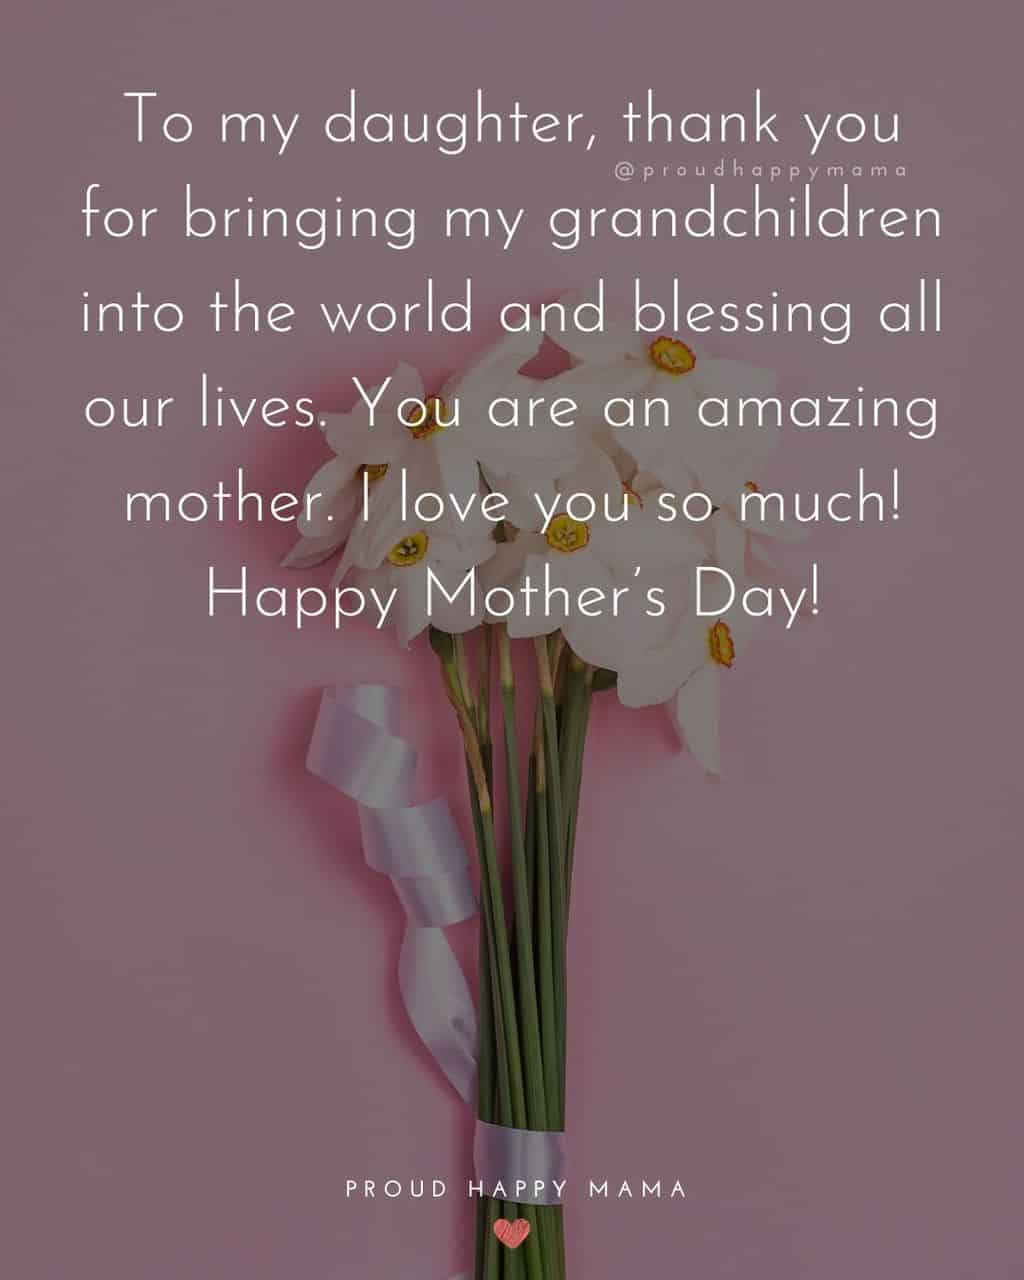 Happy Mothers Day Quotes To Daughter - To my daughter, thank you for bringing my grandchildren into the world and blessing all our lives.